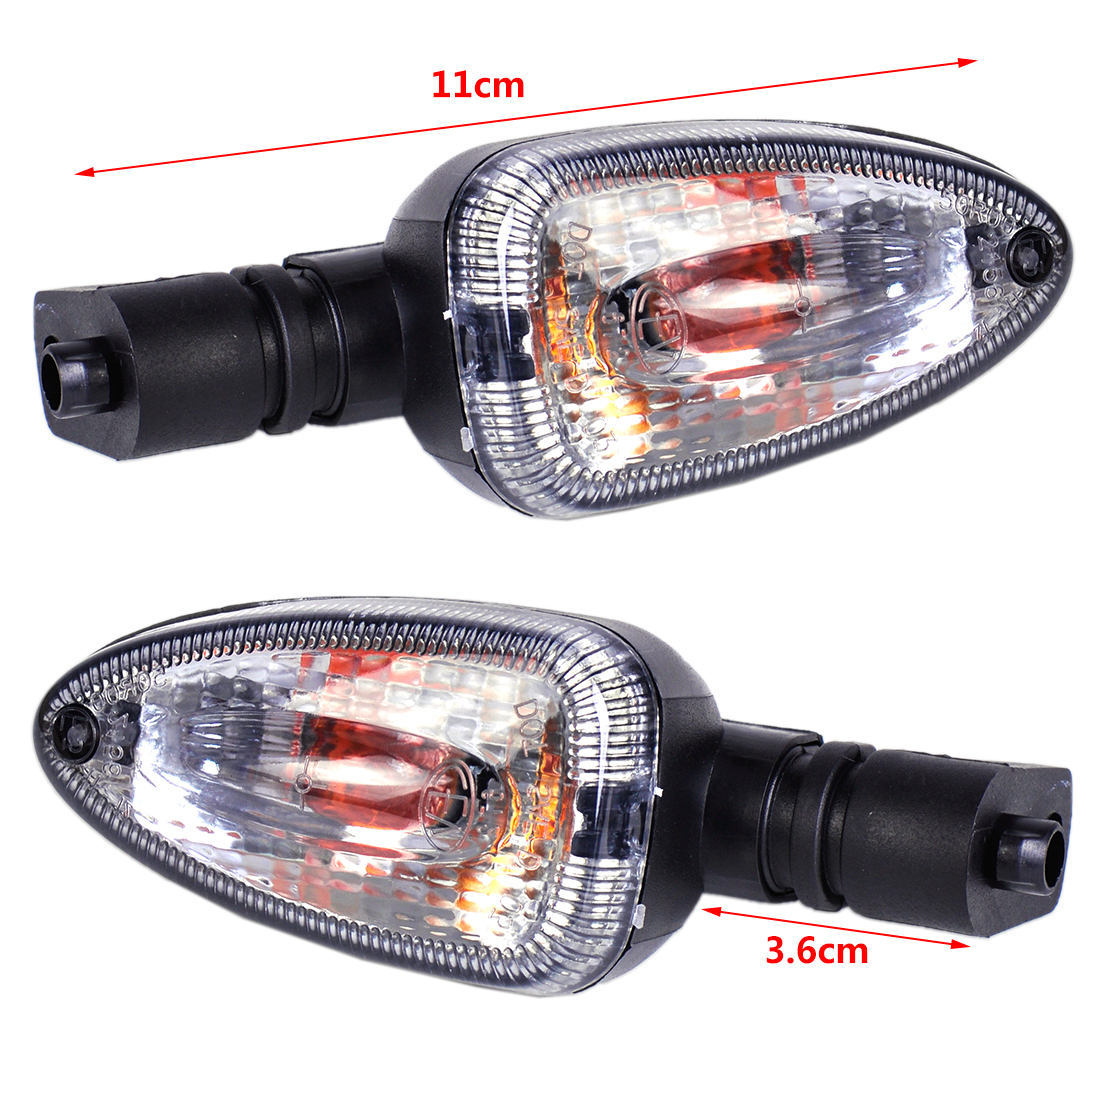 2x Motorcycle Turn Signal Indicator Light Fit For BMW F650GS F800S